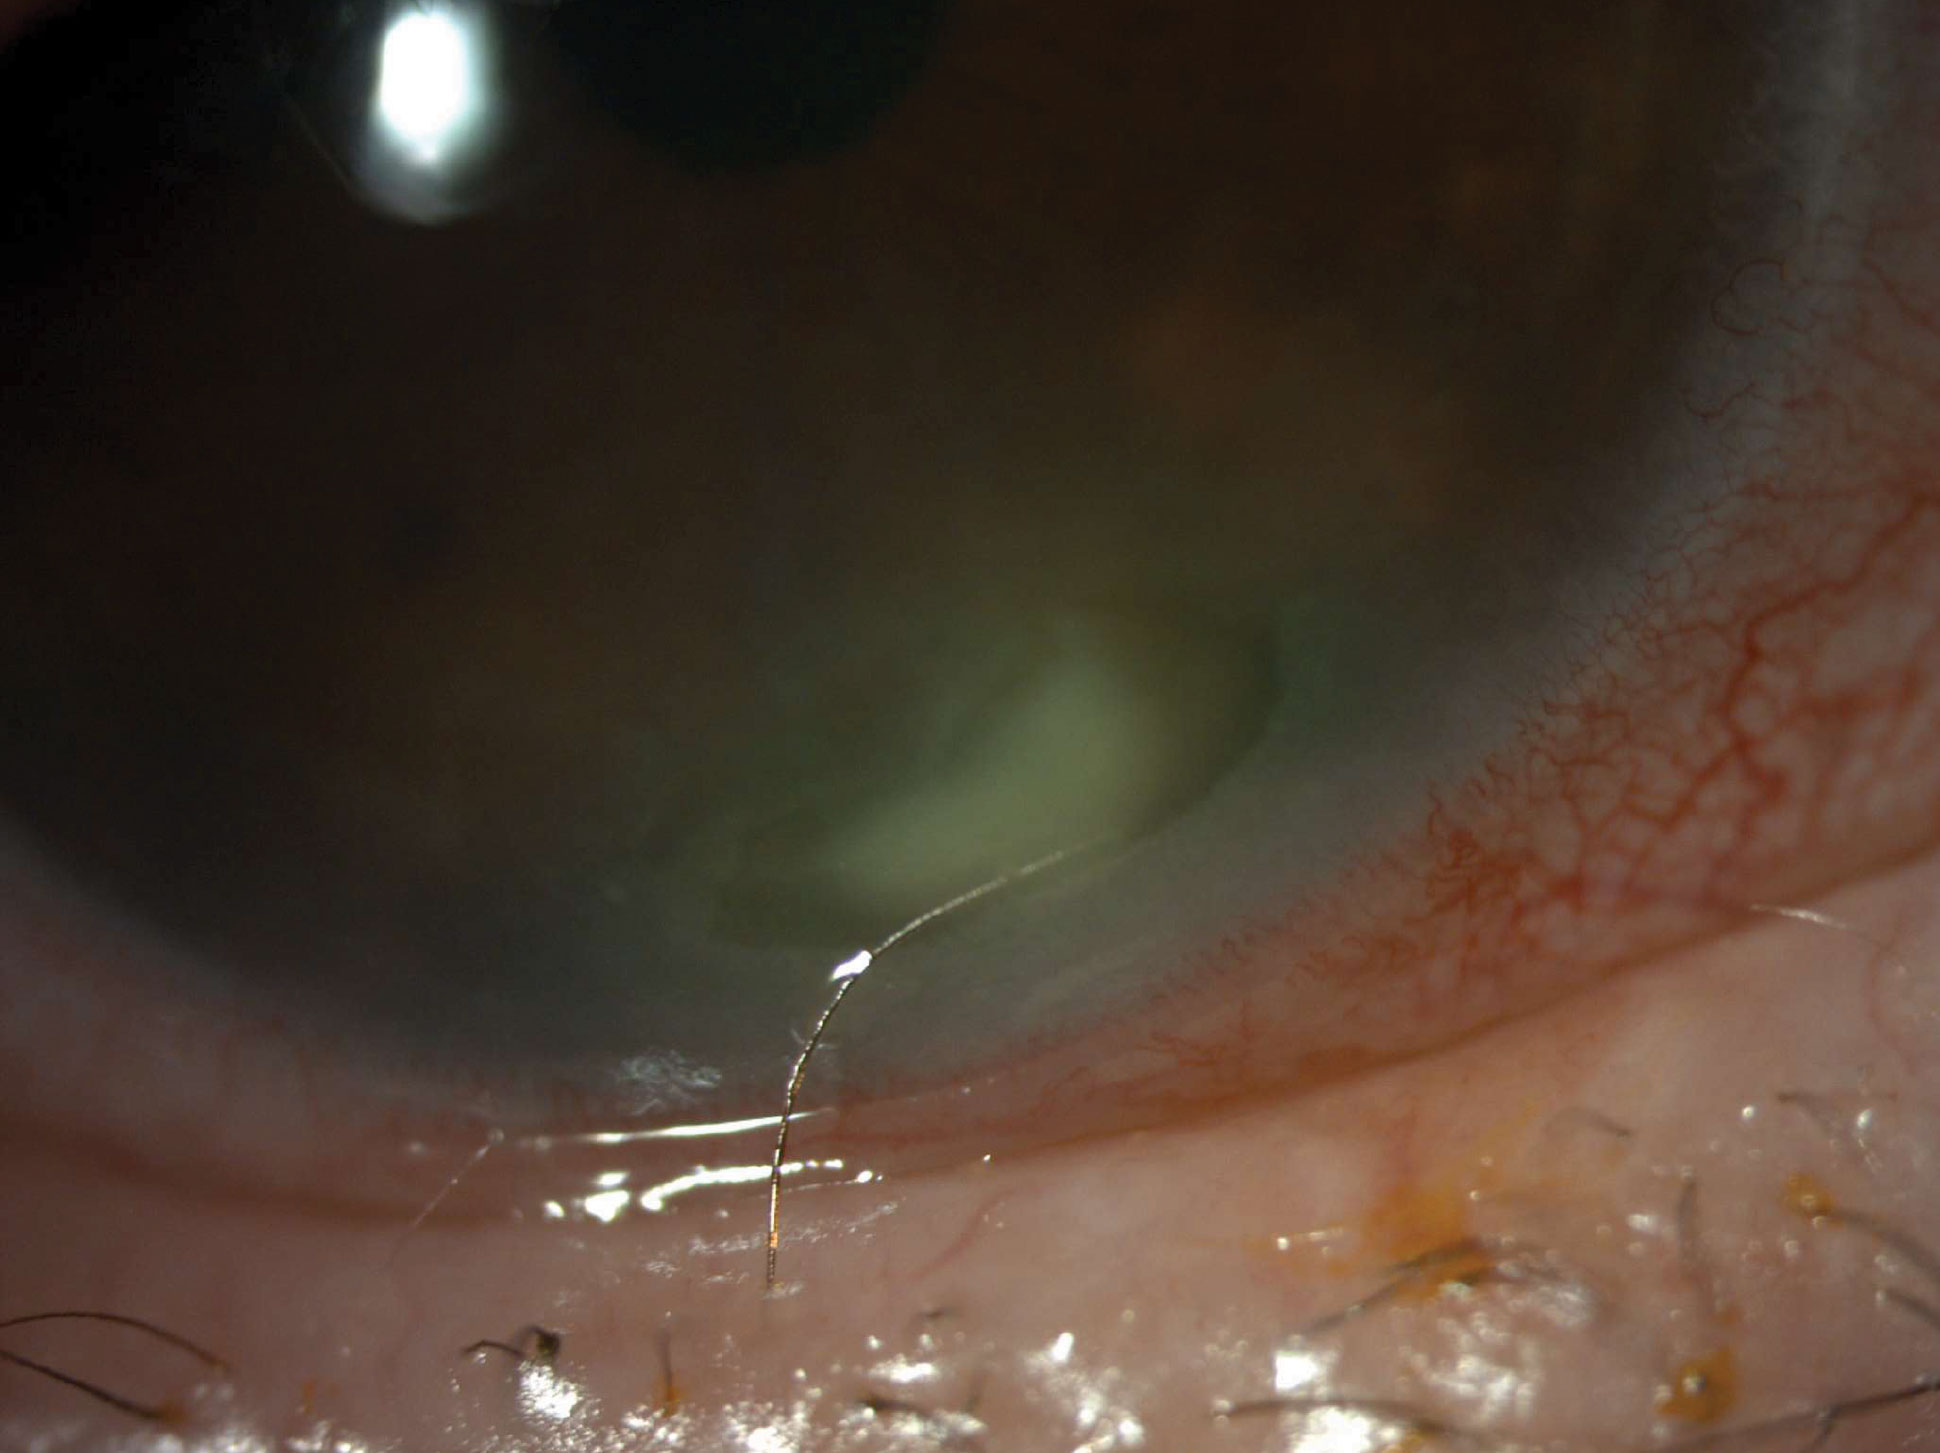 Patient at initial presentation with a corneal ulcer and one distinct lash (trichiasis).